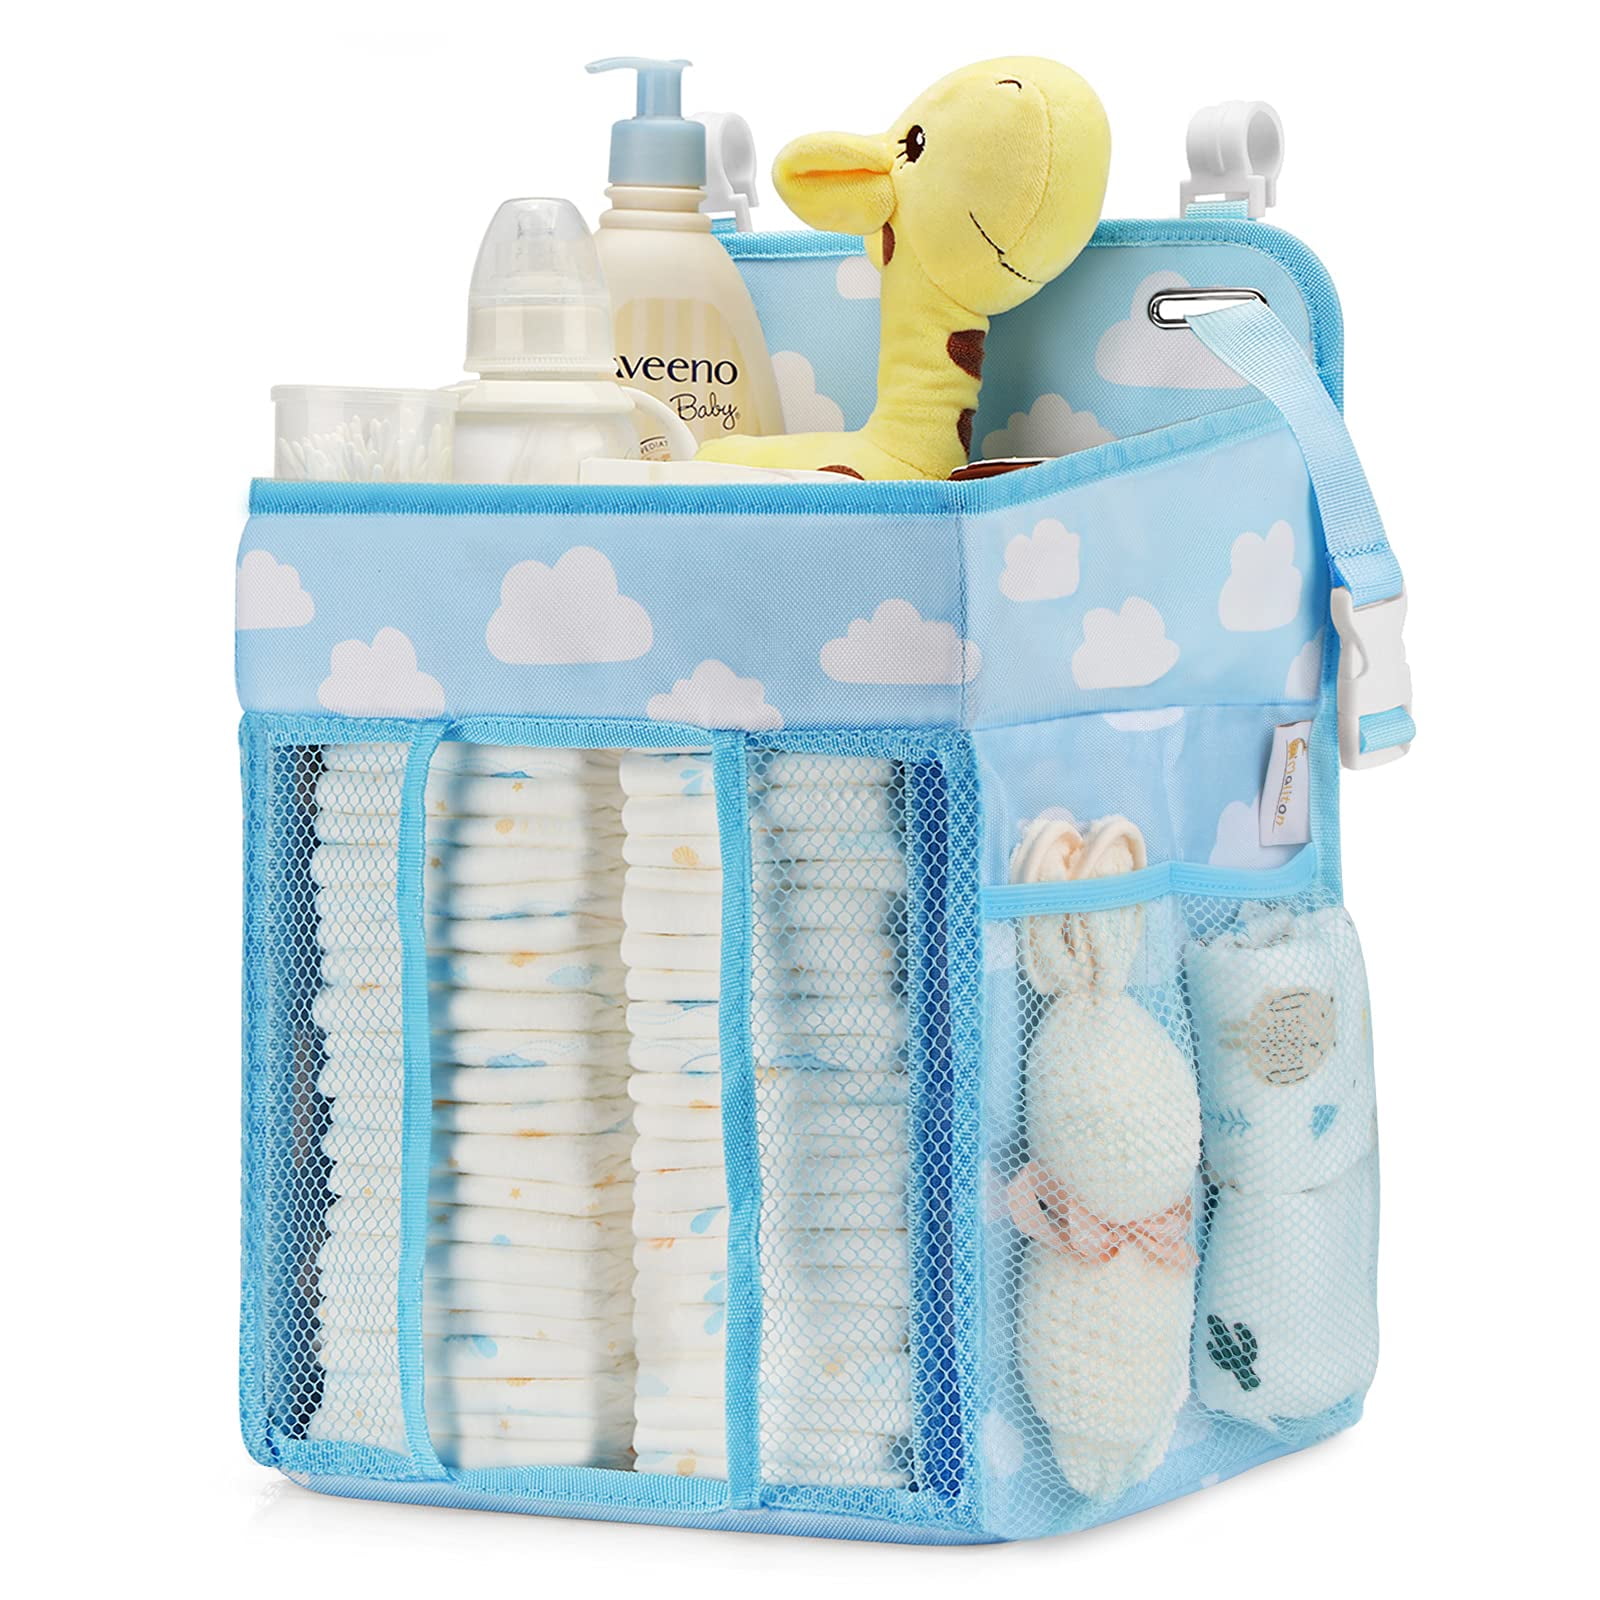 Diaper Caddy Organizer for Nursery Room or Bathroom Storage Sustainable  Gift for Home 